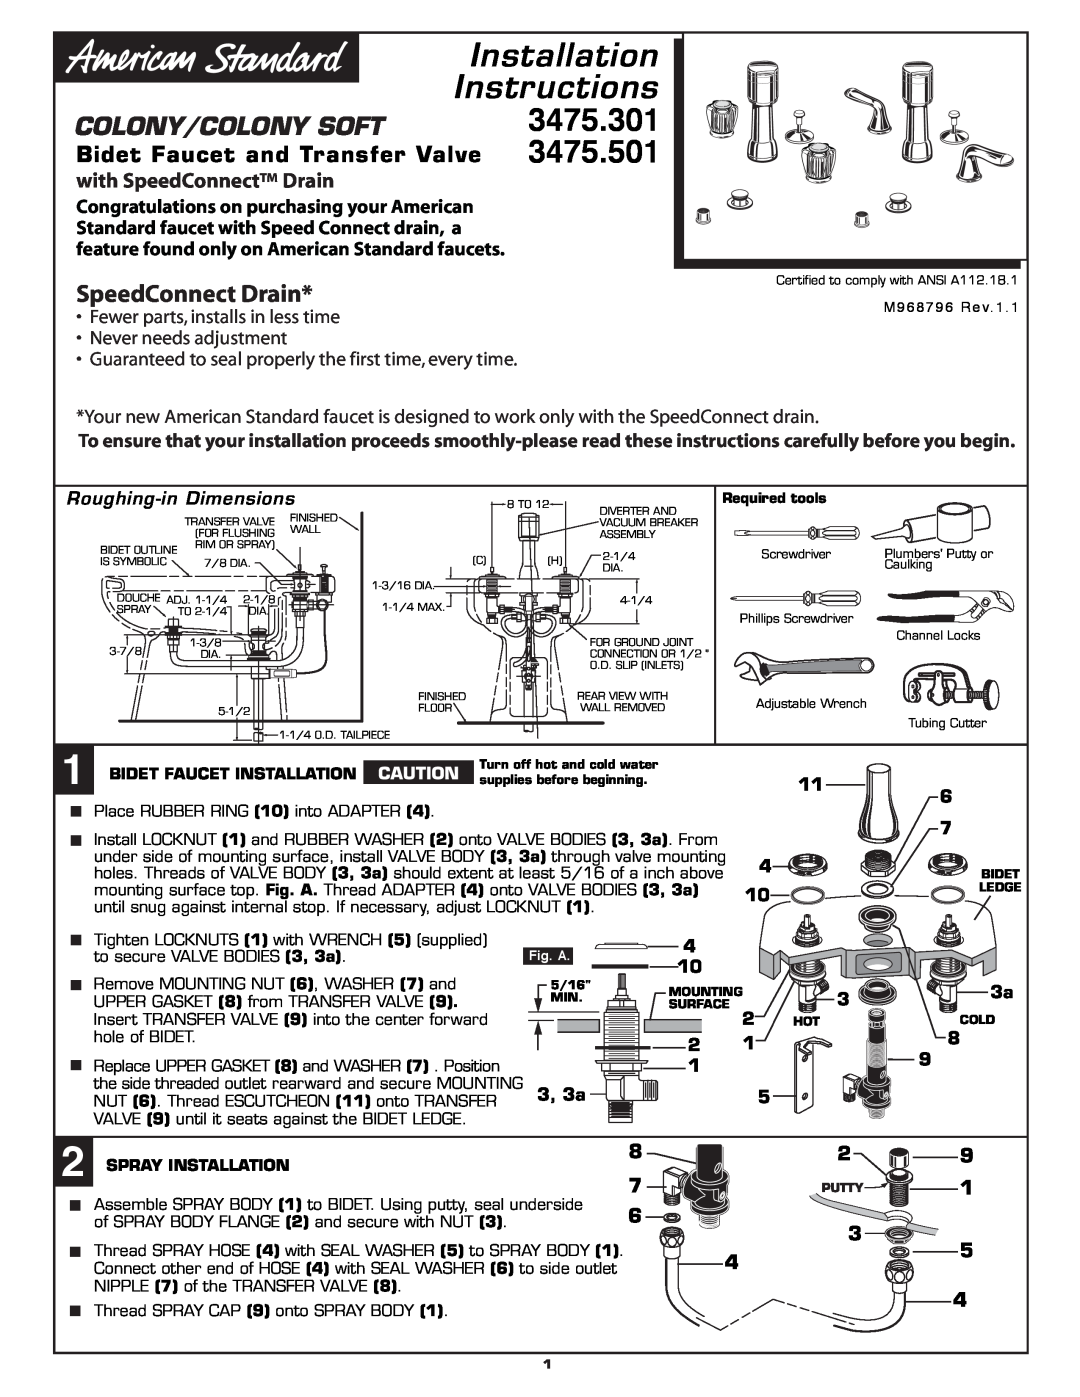 American Standard 3475.501 installation instructions Bidet Faucet and Transfer Valve, with SpeedConnect Drain, 3475.301 